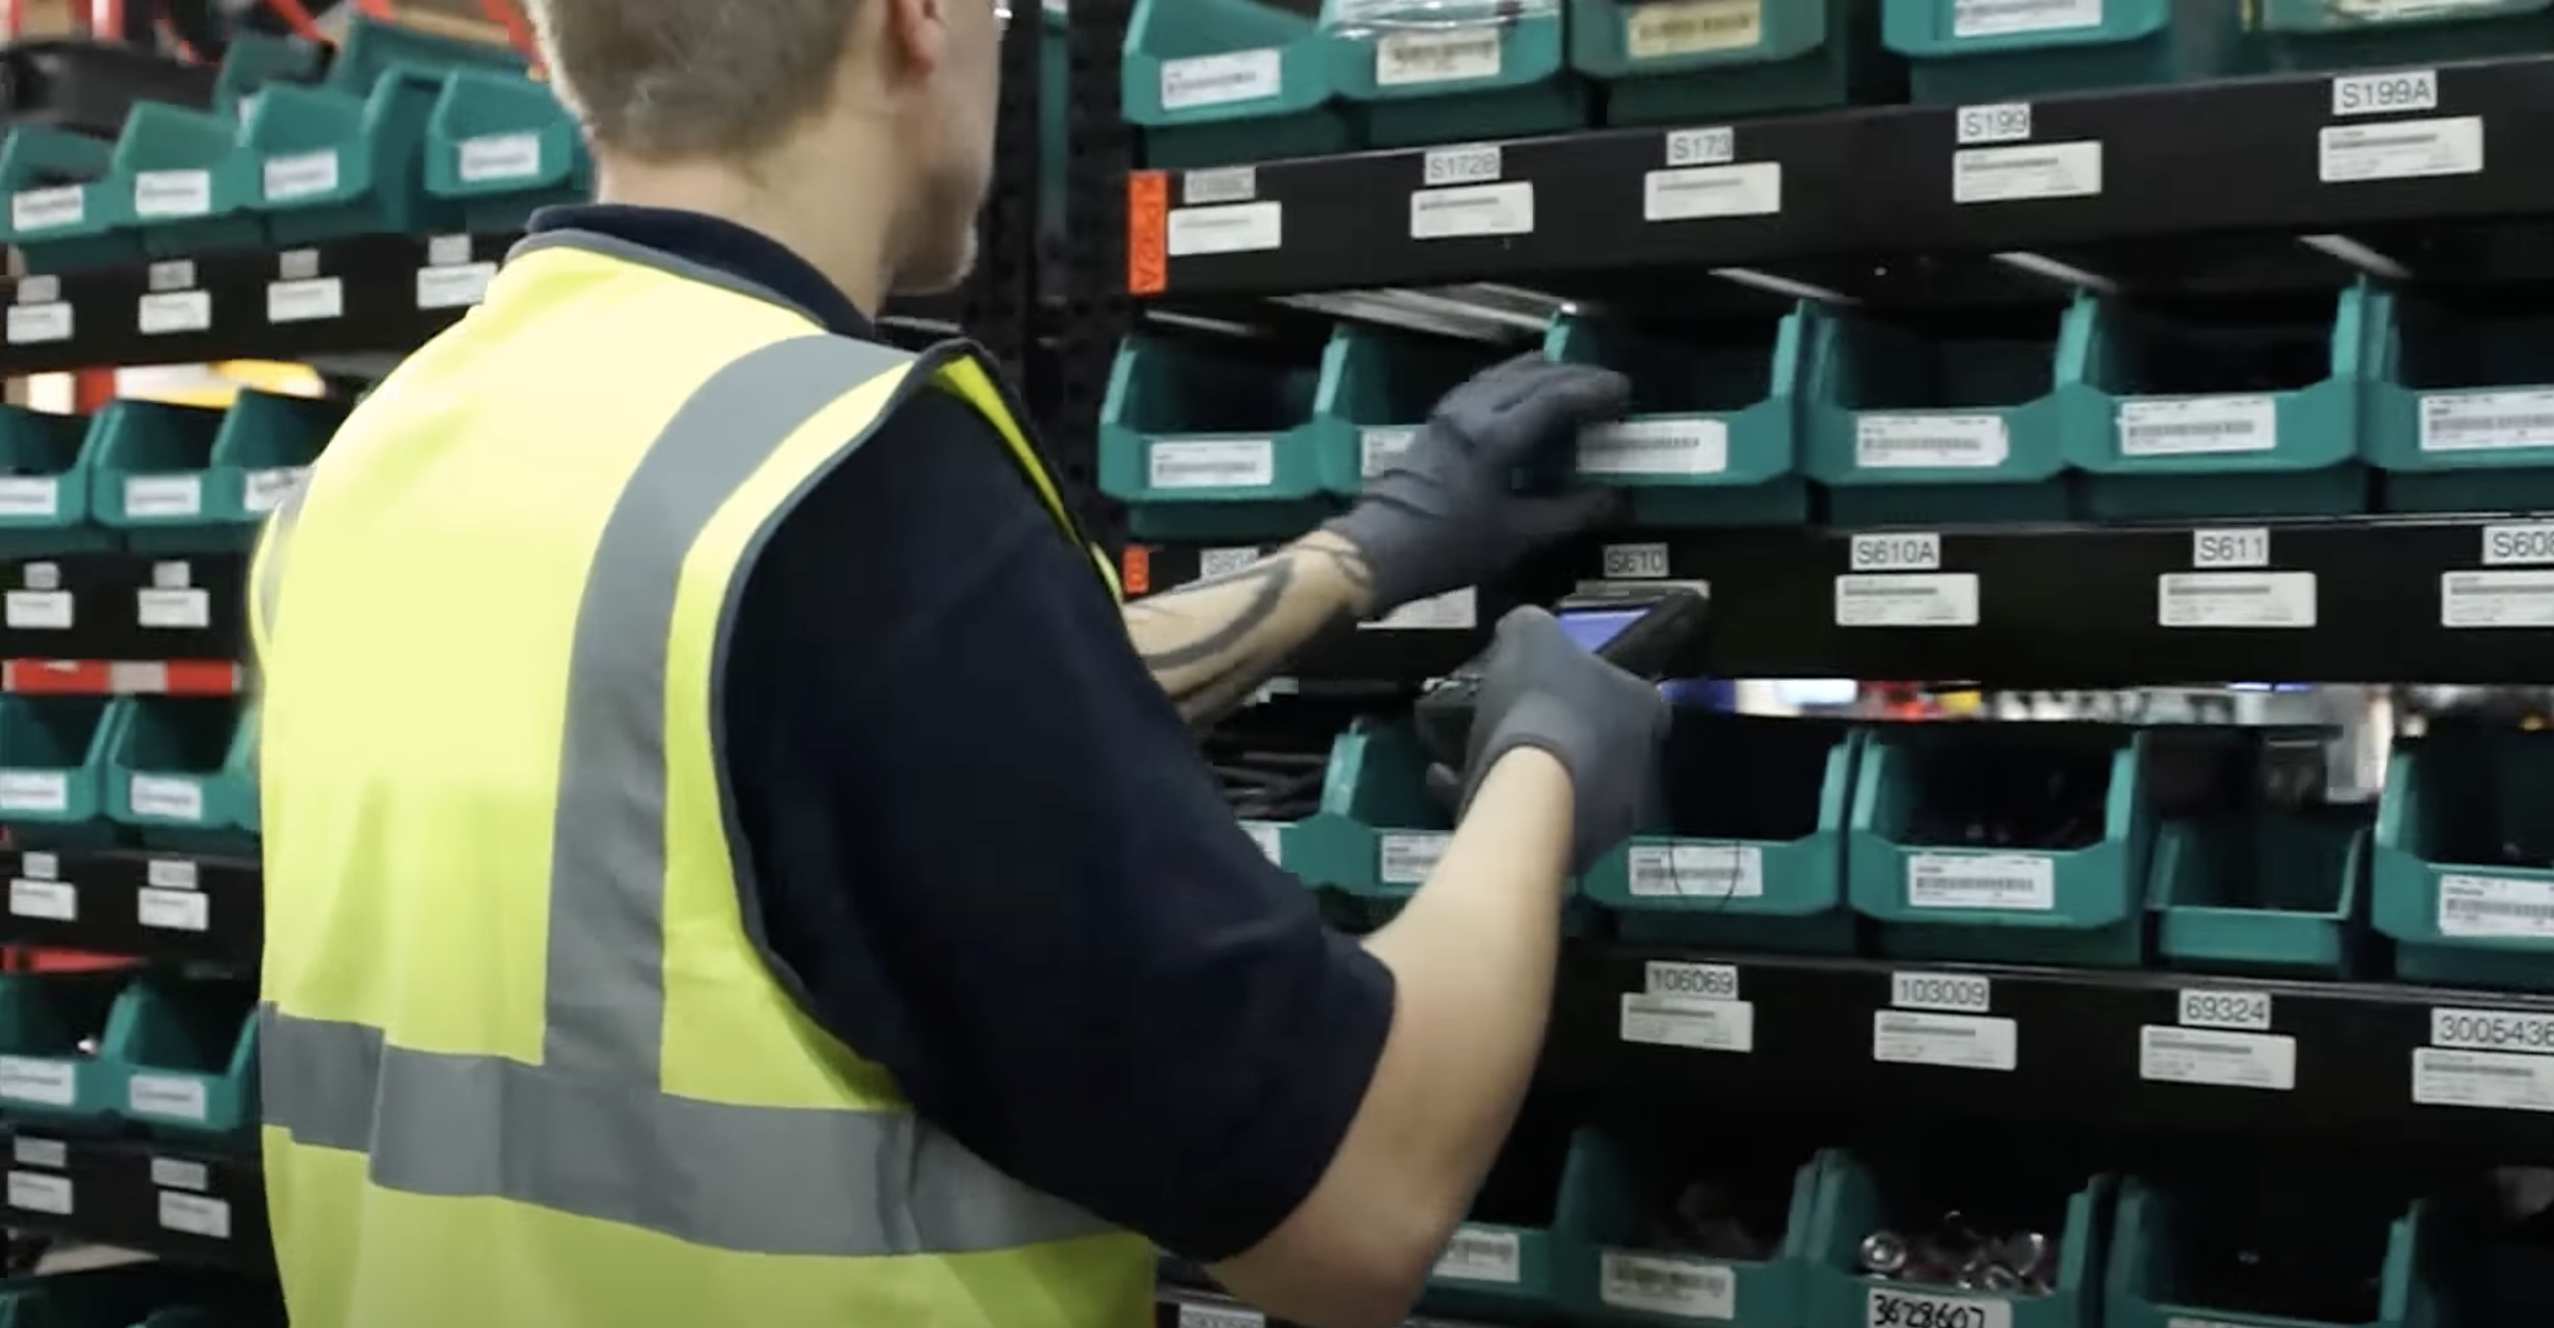 Man looking through bins of fasteners with a barcode scanner